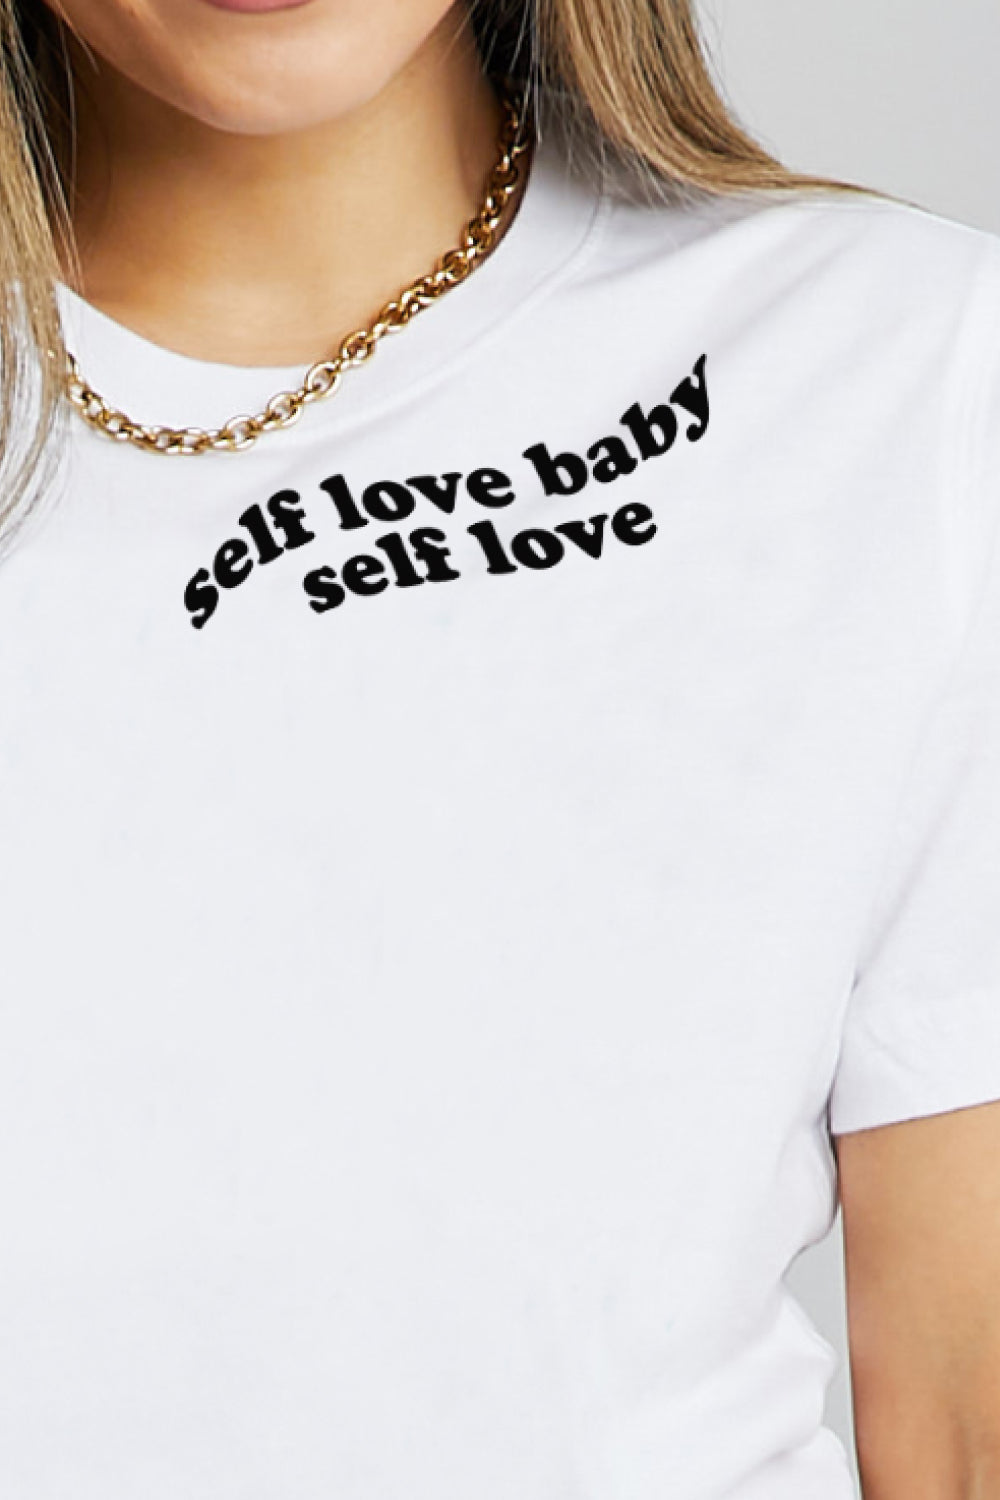 Simply Love SELF LOVE BABY SELF LOVE Graphic Cotton T-Shirt